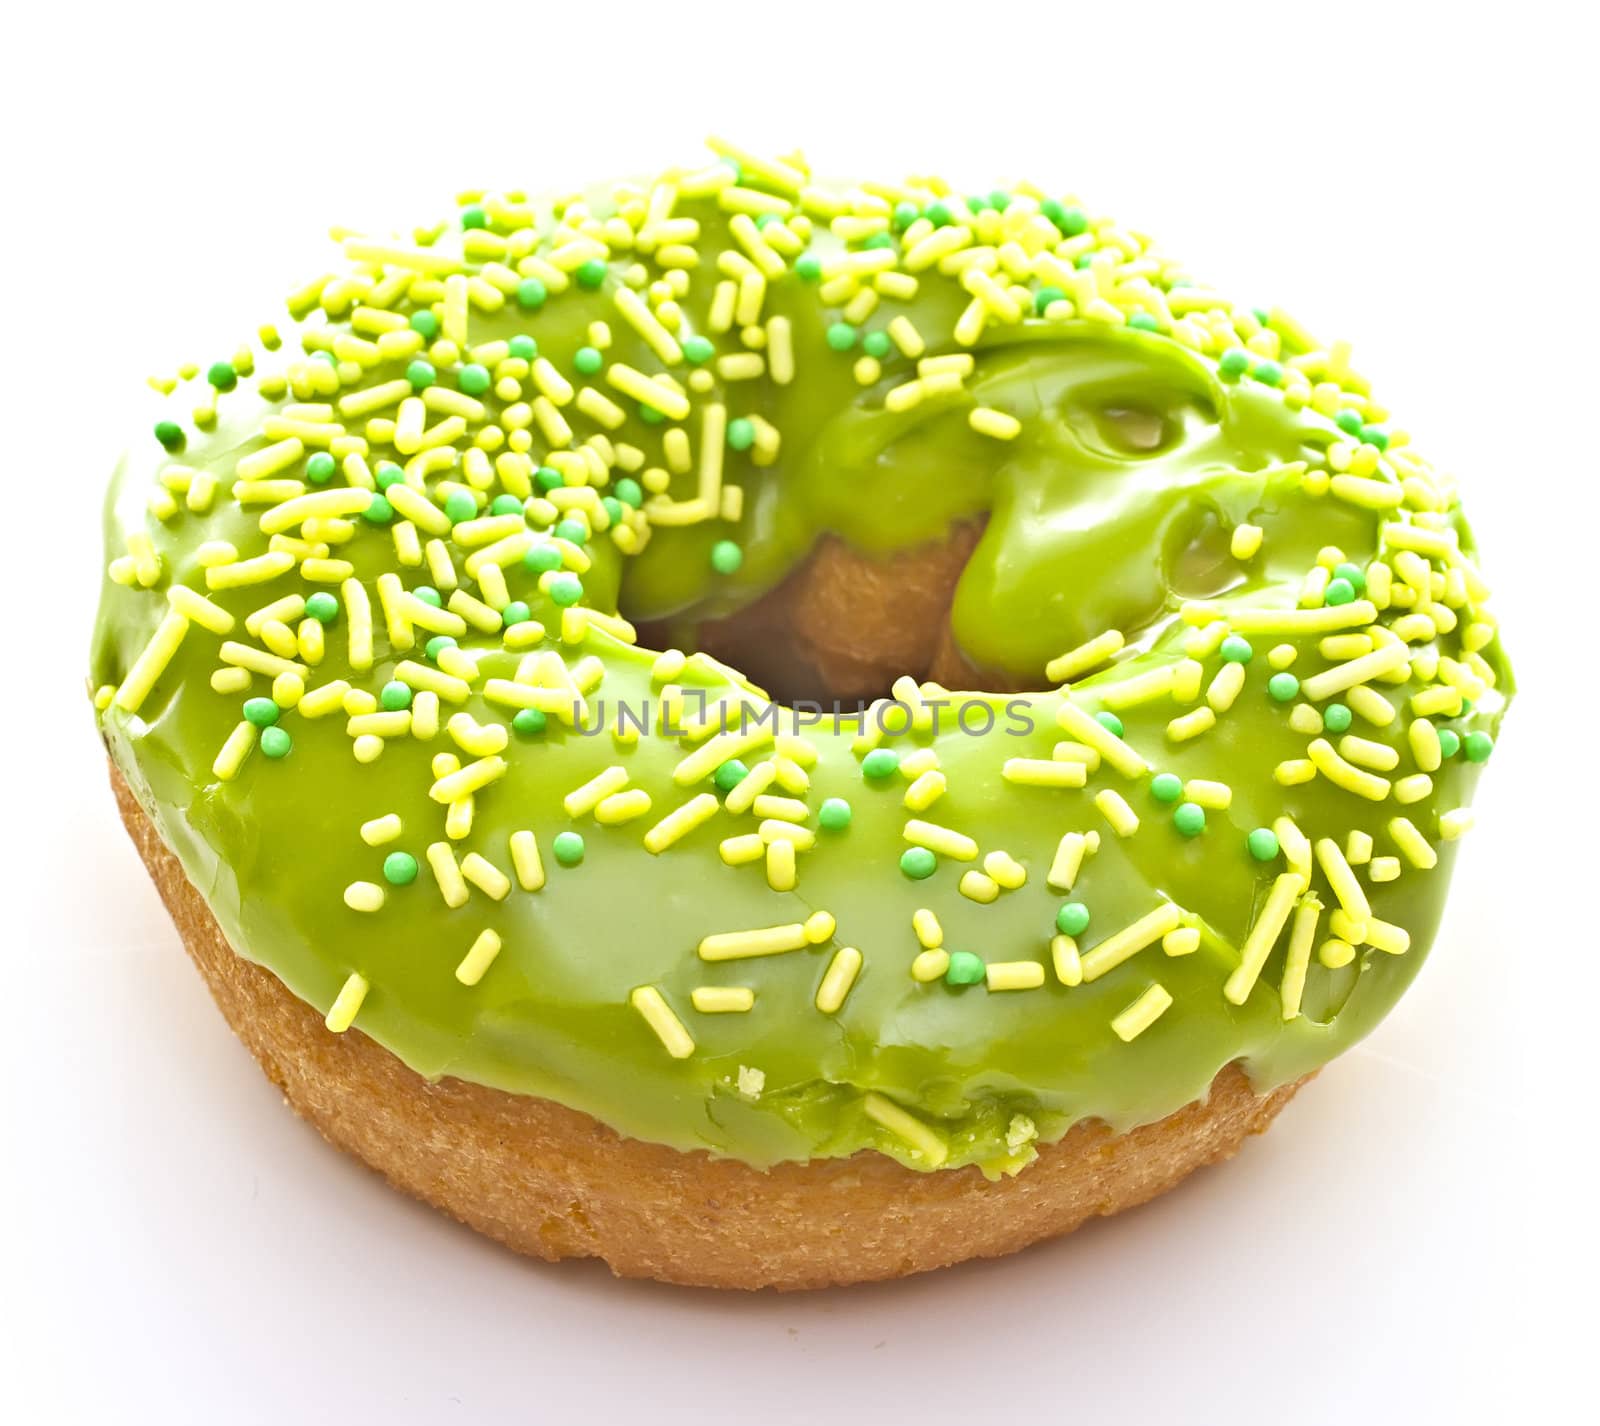 Donut on a white background with green glaze.
